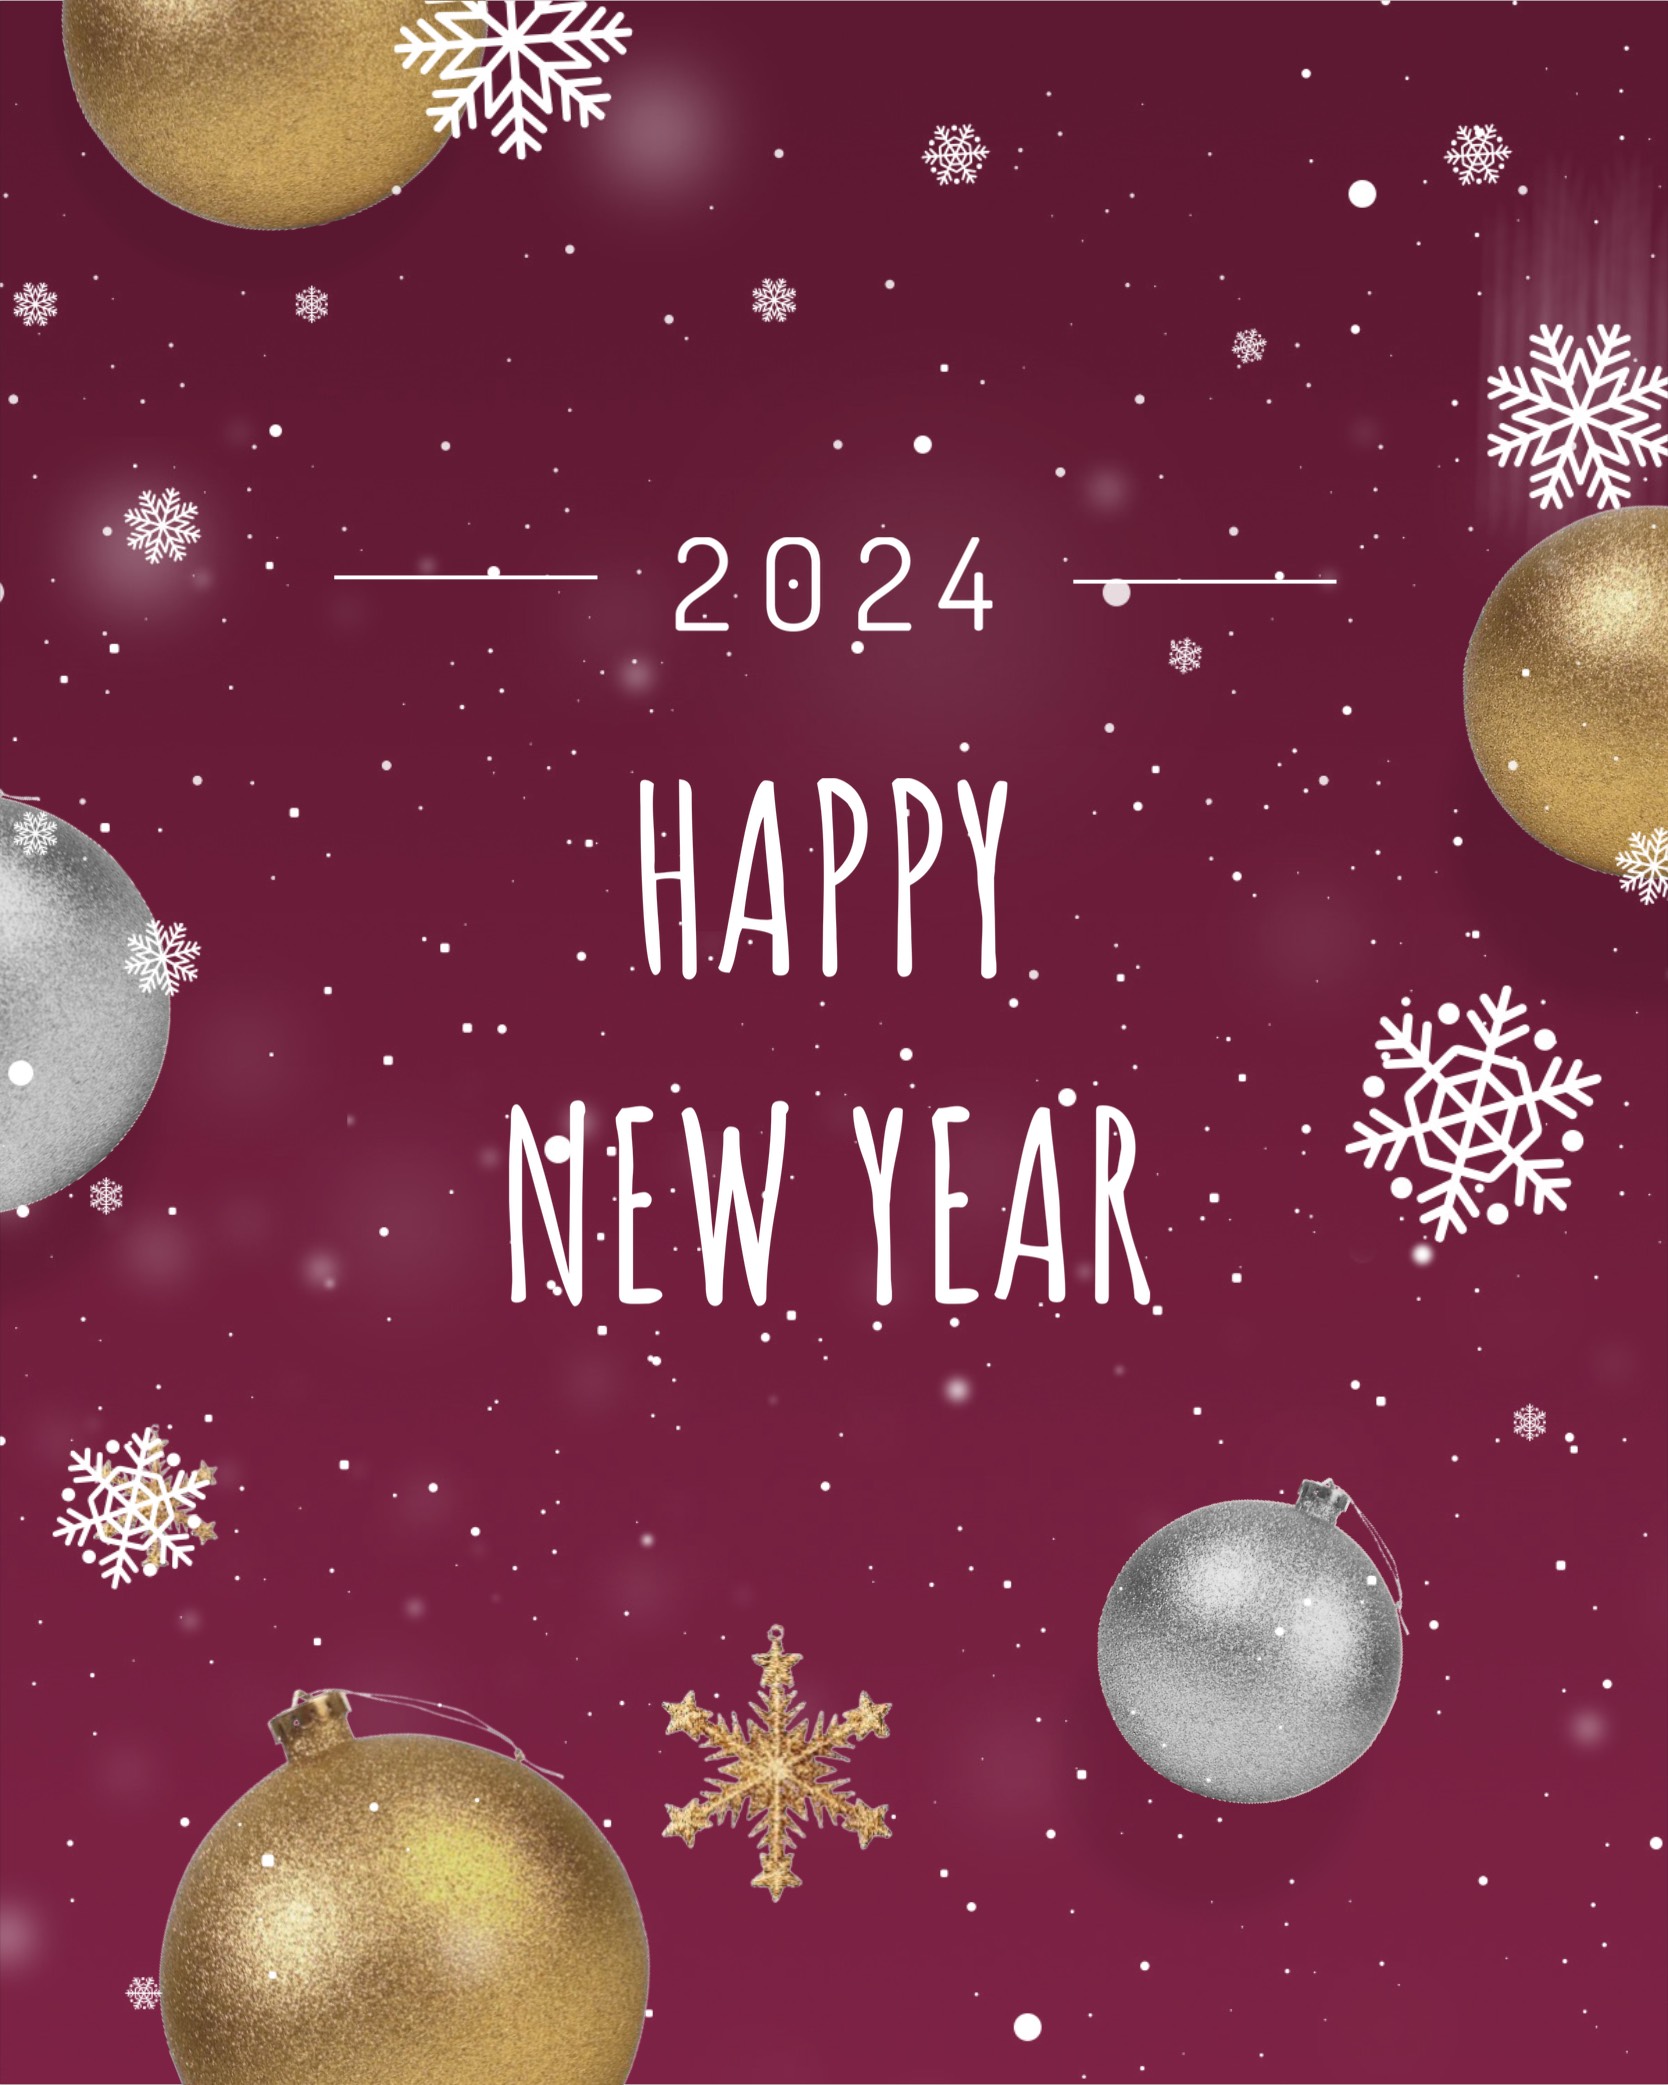 A Red Background With Gold And Silver Ornaments And The Words Happy New Year Happy New Year Template